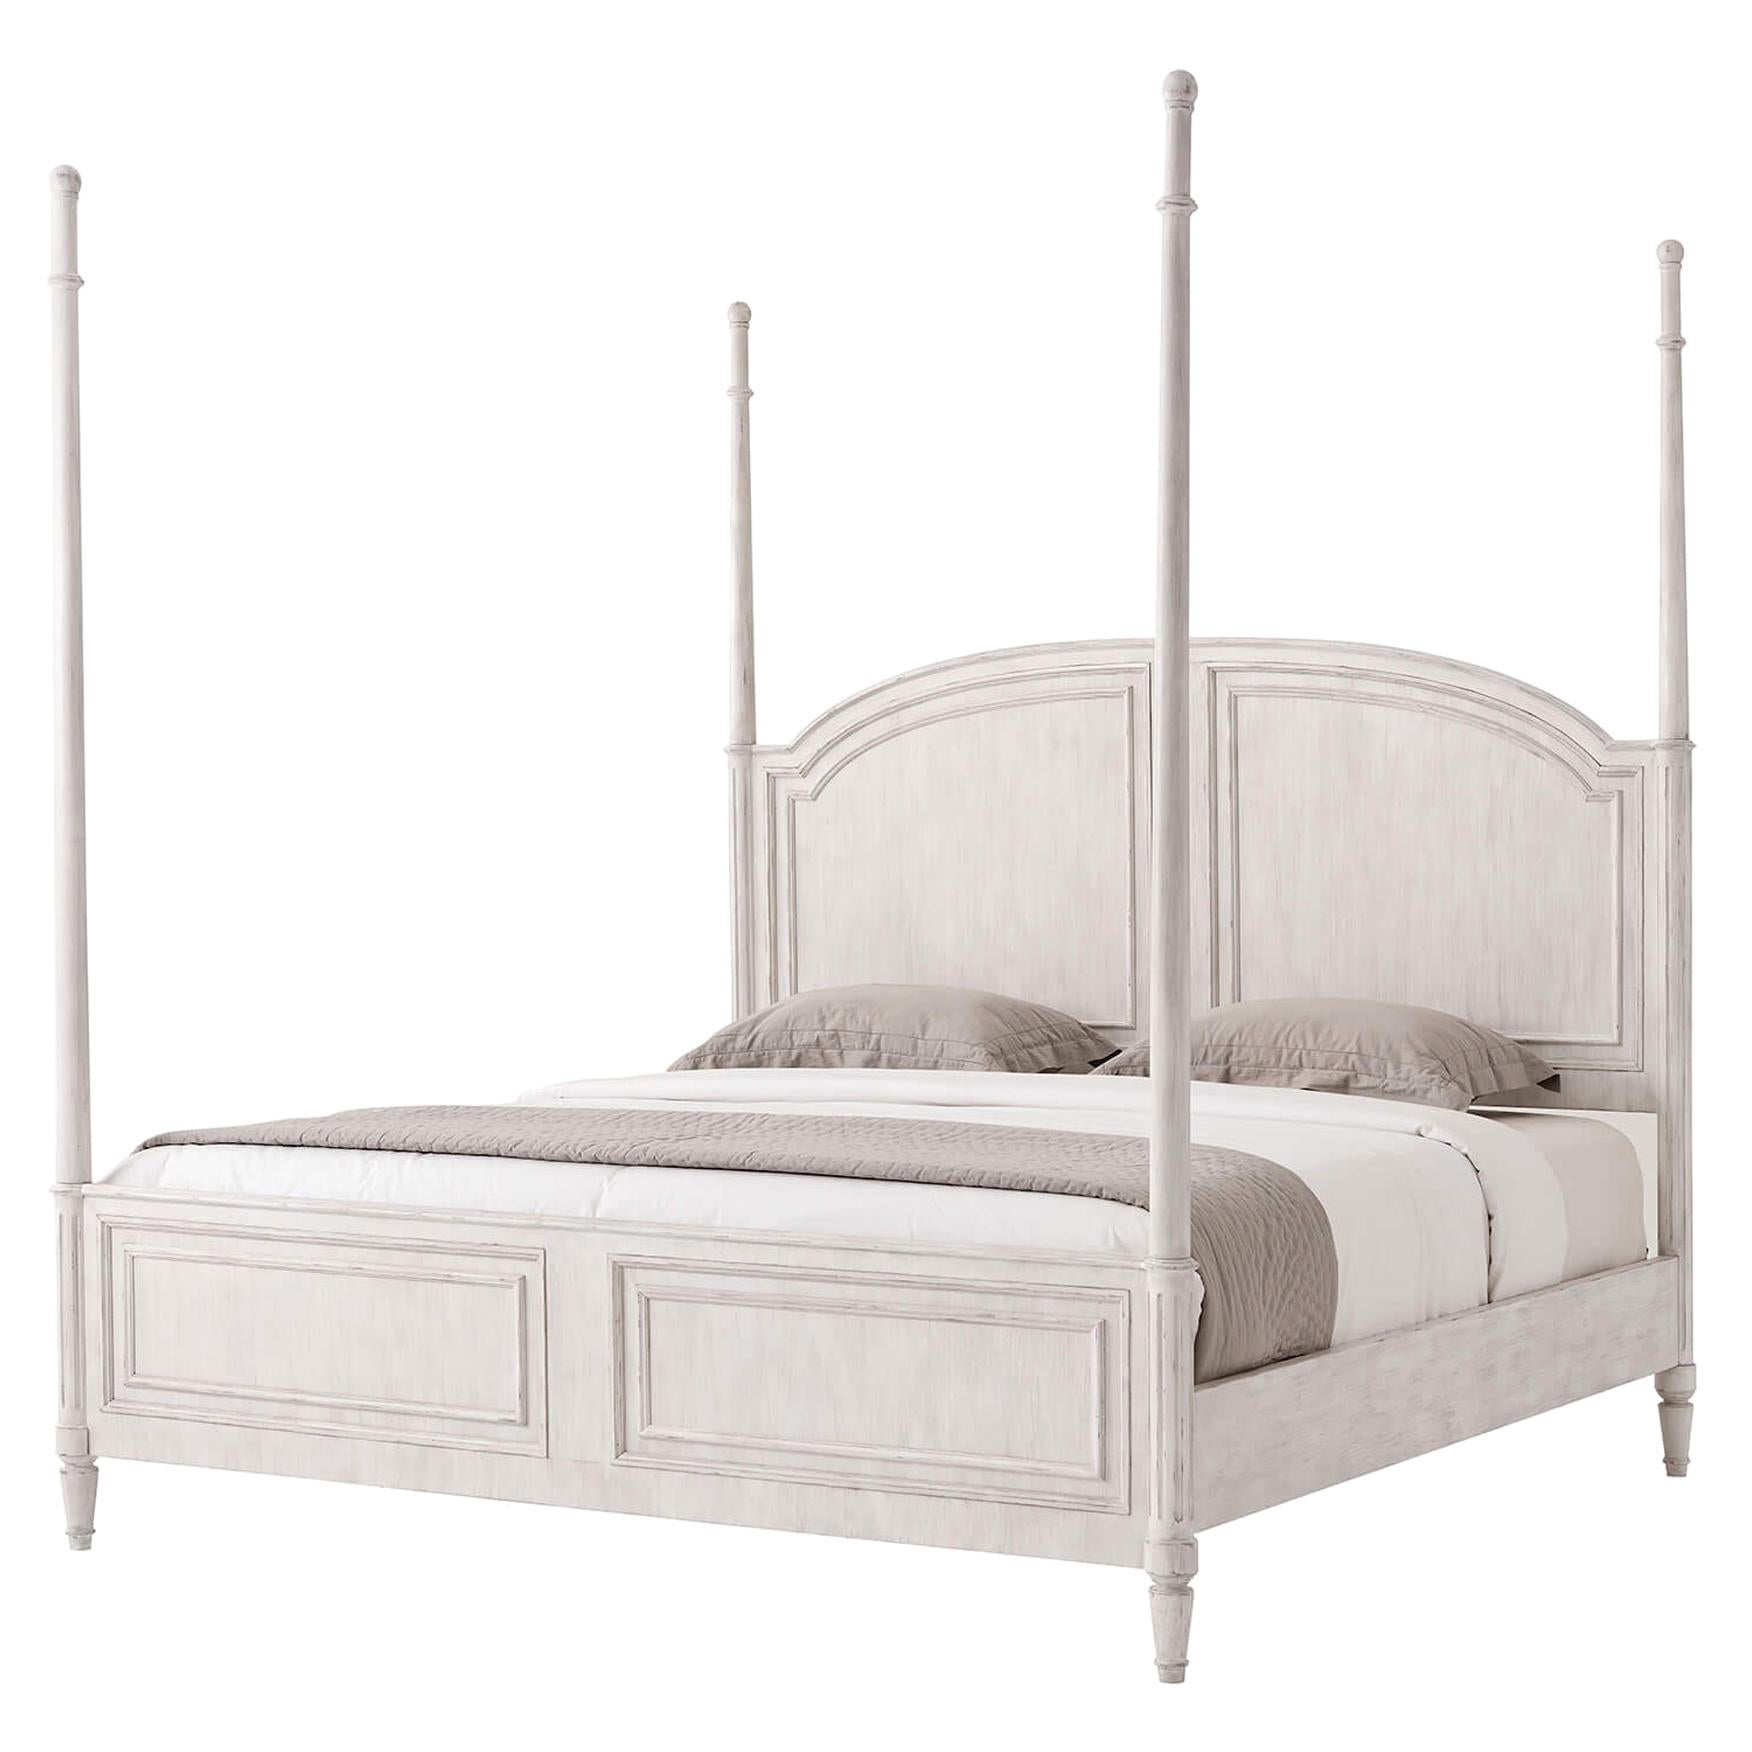 Rustic Painted Four Post King Bed For, King Bed 4 Poster